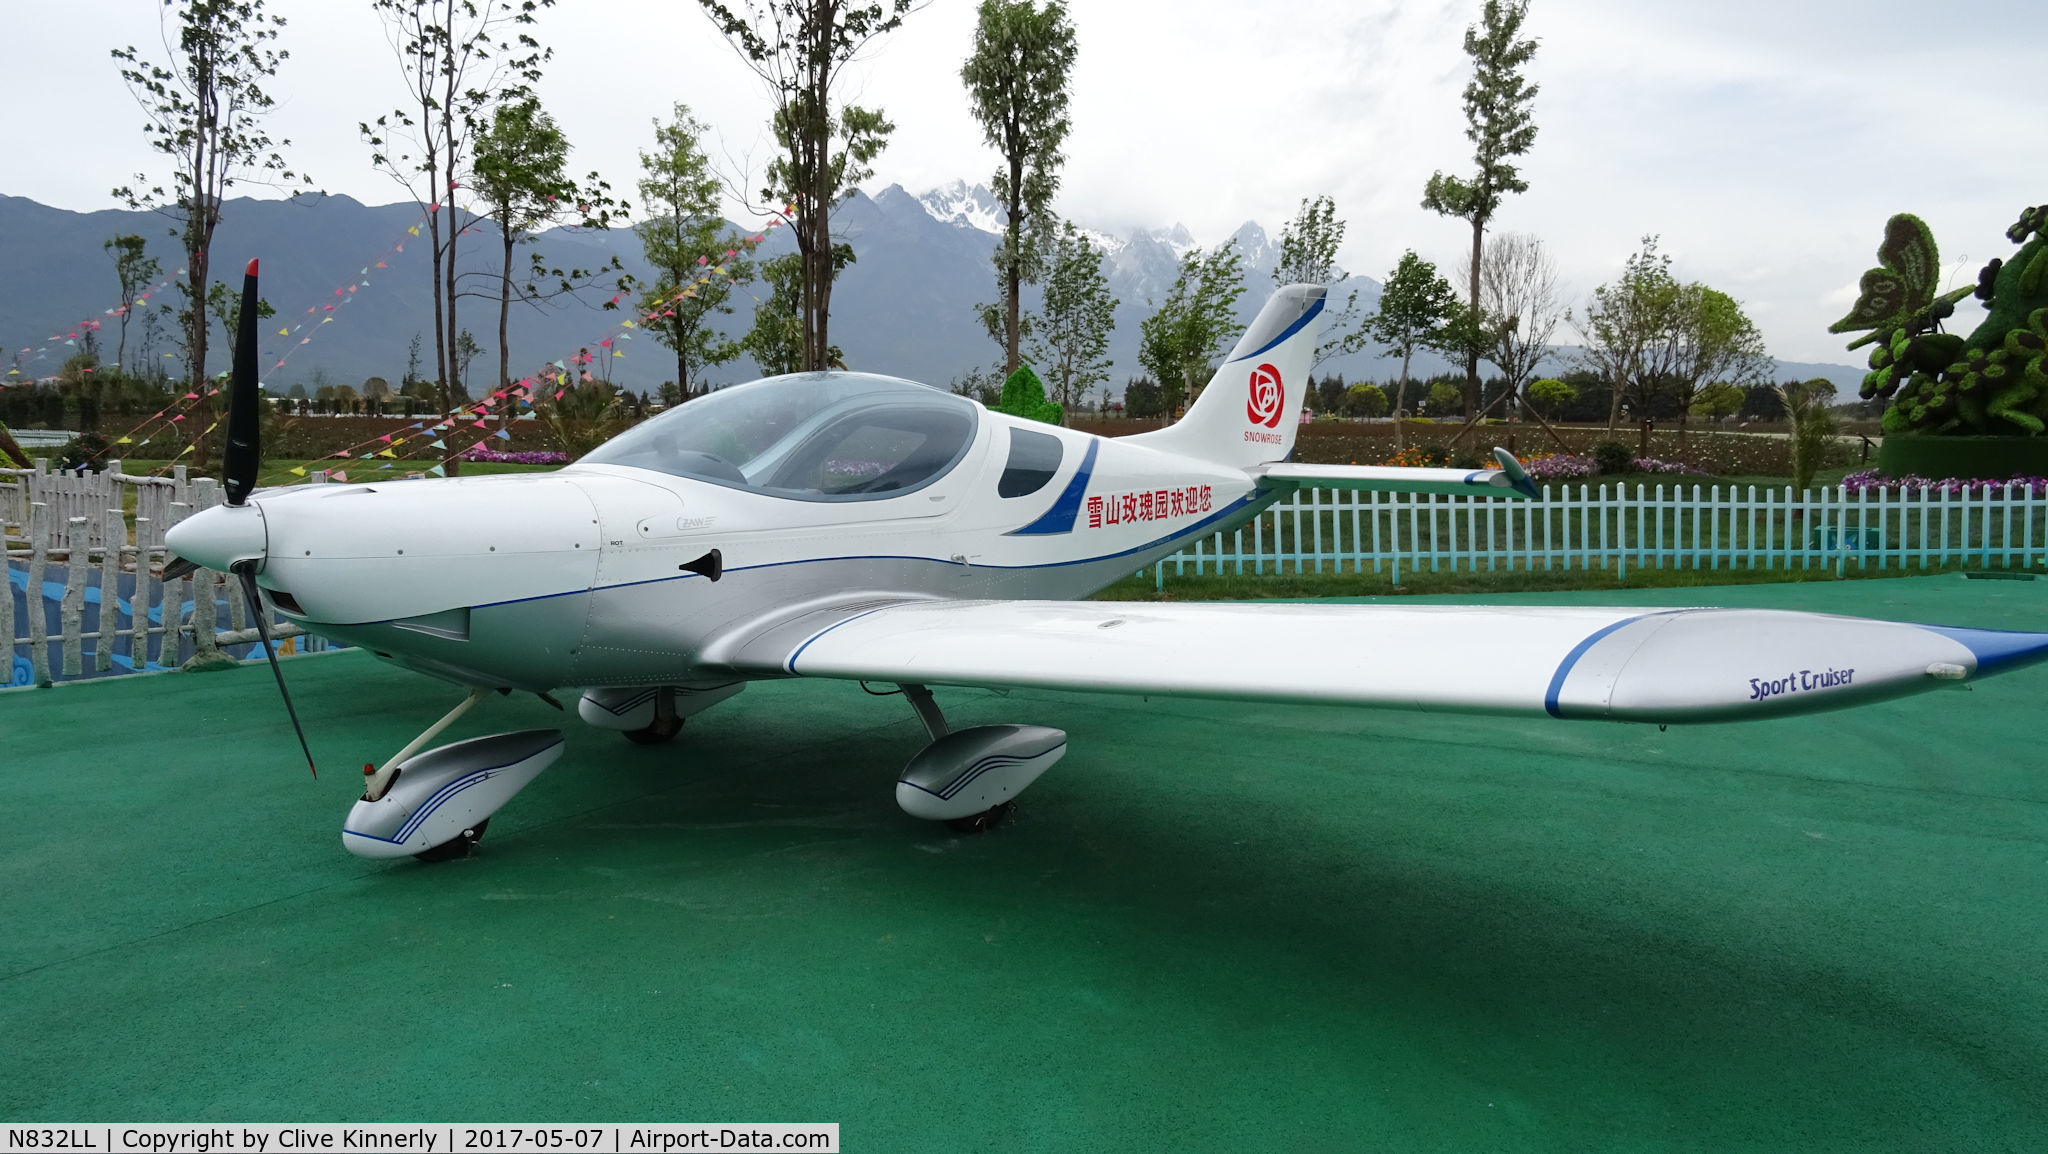 N832LL, 2007 CZAW SportCruiser C/N 07SC050, Aircraft formerly registered as N832LL. Seen at Rose Manor ornamental park, about 3 miles north of city of Lijiang, in Yunnan province China, May 2017.